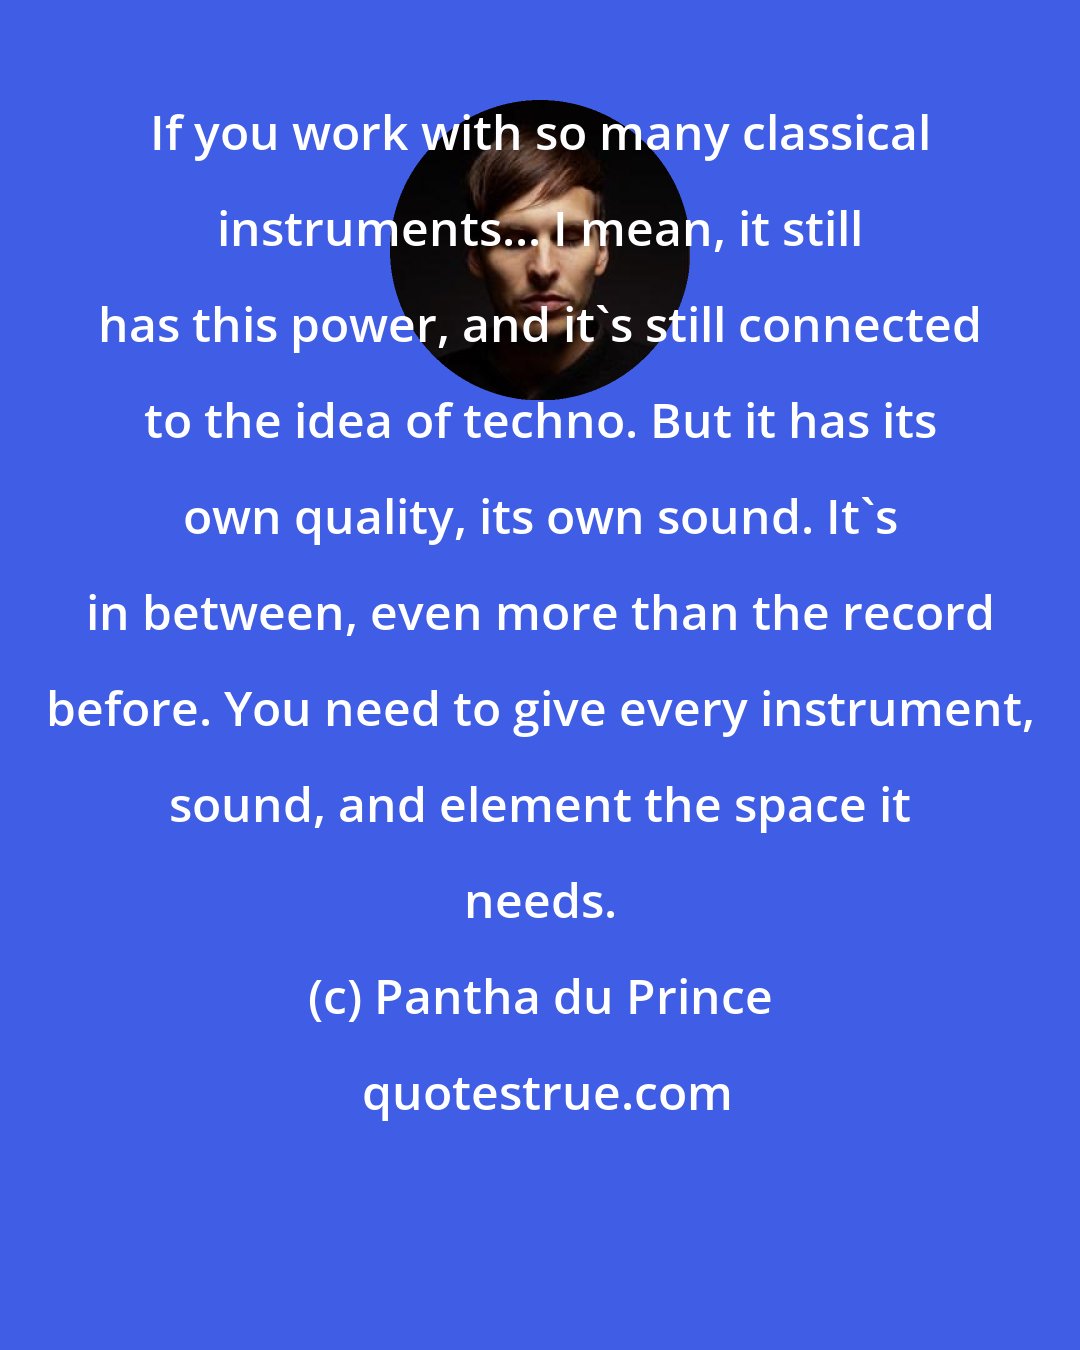 Pantha du Prince: If you work with so many classical instruments... I mean, it still has this power, and it's still connected to the idea of techno. But it has its own quality, its own sound. It's in between, even more than the record before. You need to give every instrument, sound, and element the space it needs.